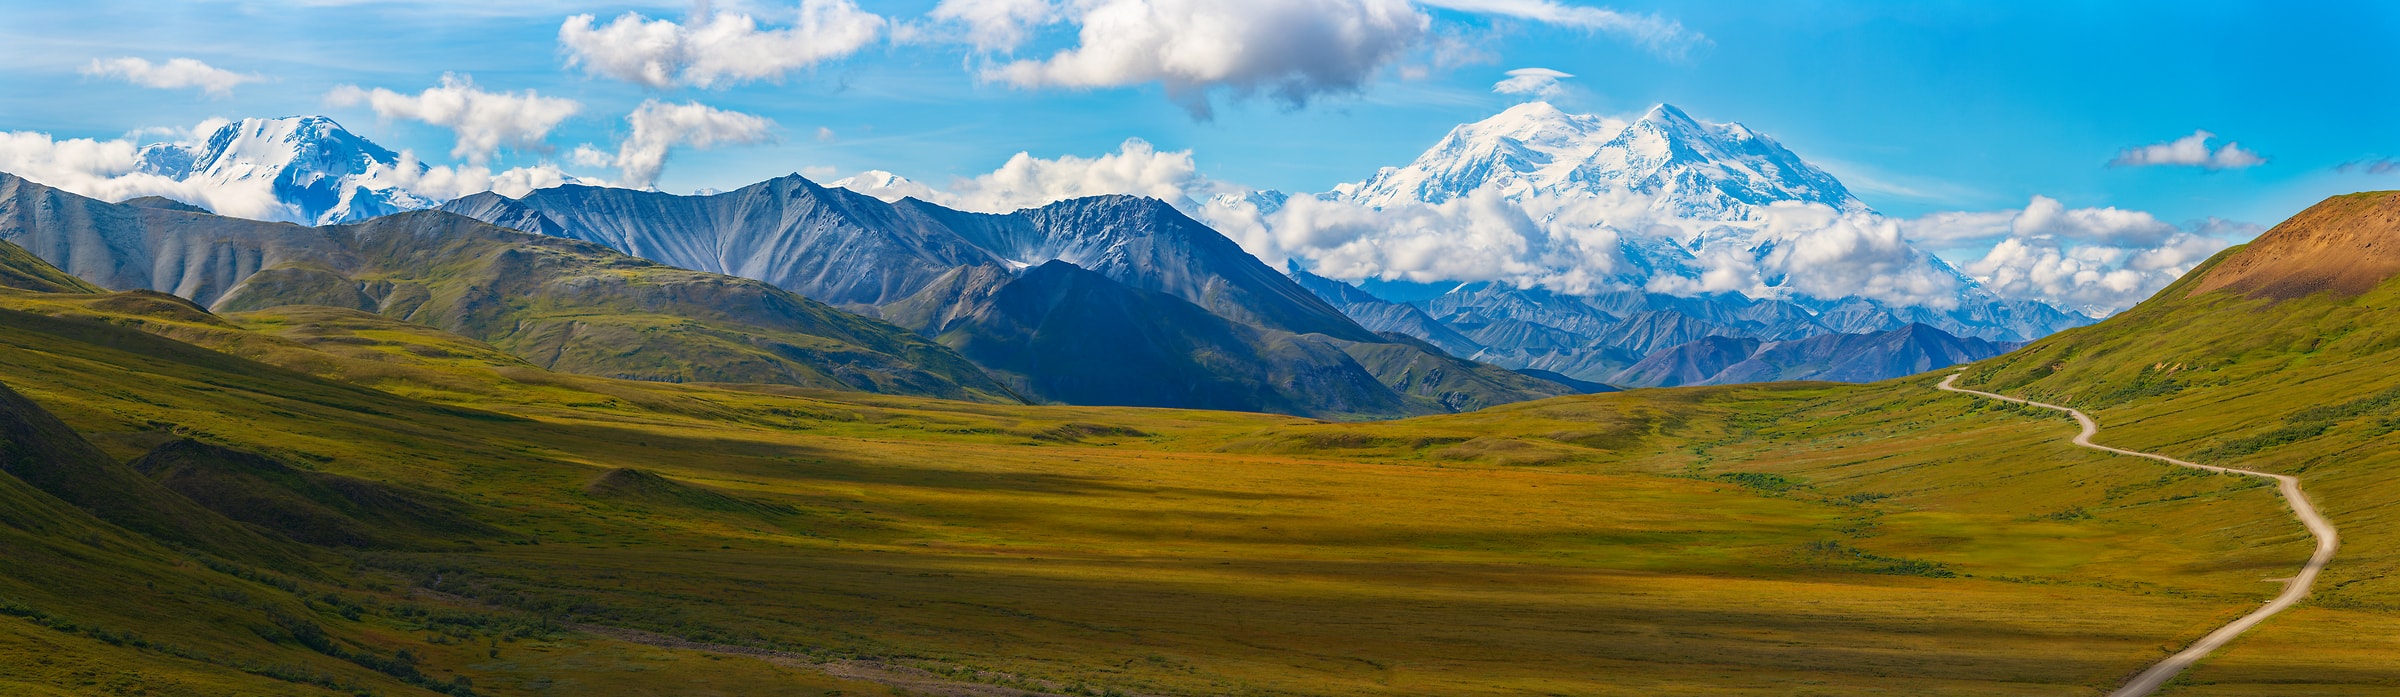 281 megapixels! A very high resolution, large-format VAST photo print of a road leading across the tundra to Denali; landscape photograph created by John Freeman in Stony Pass Overlook, Denali National Park & Preserve, Alaska.